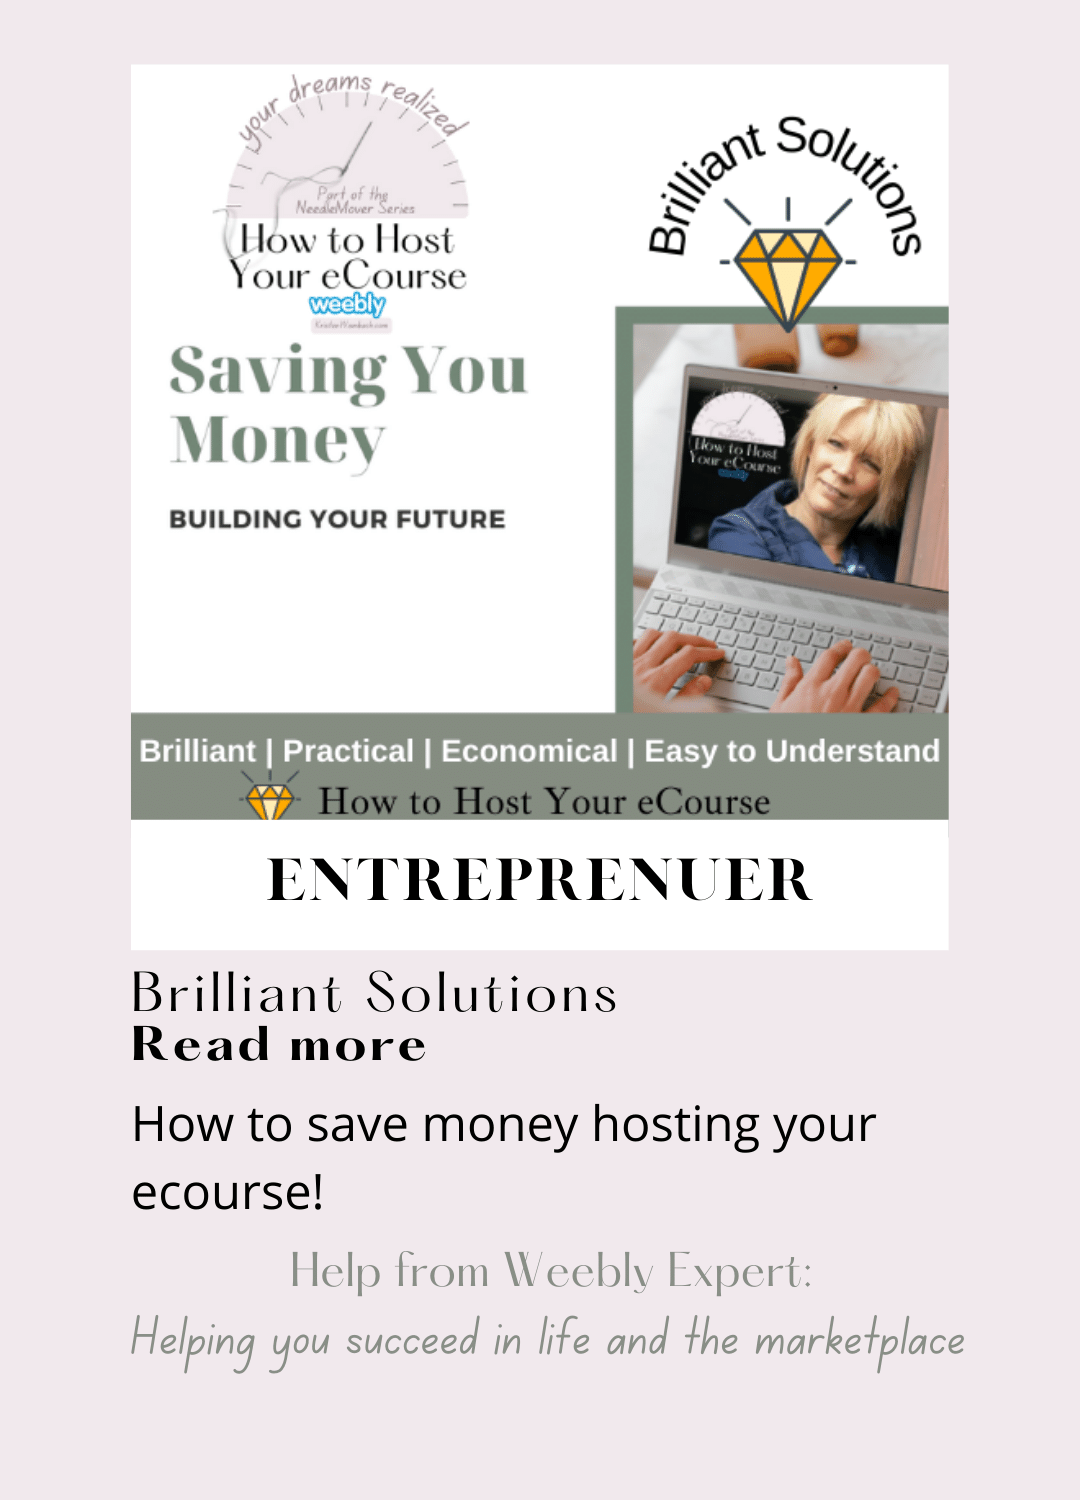 Weebly, host your ecourse 